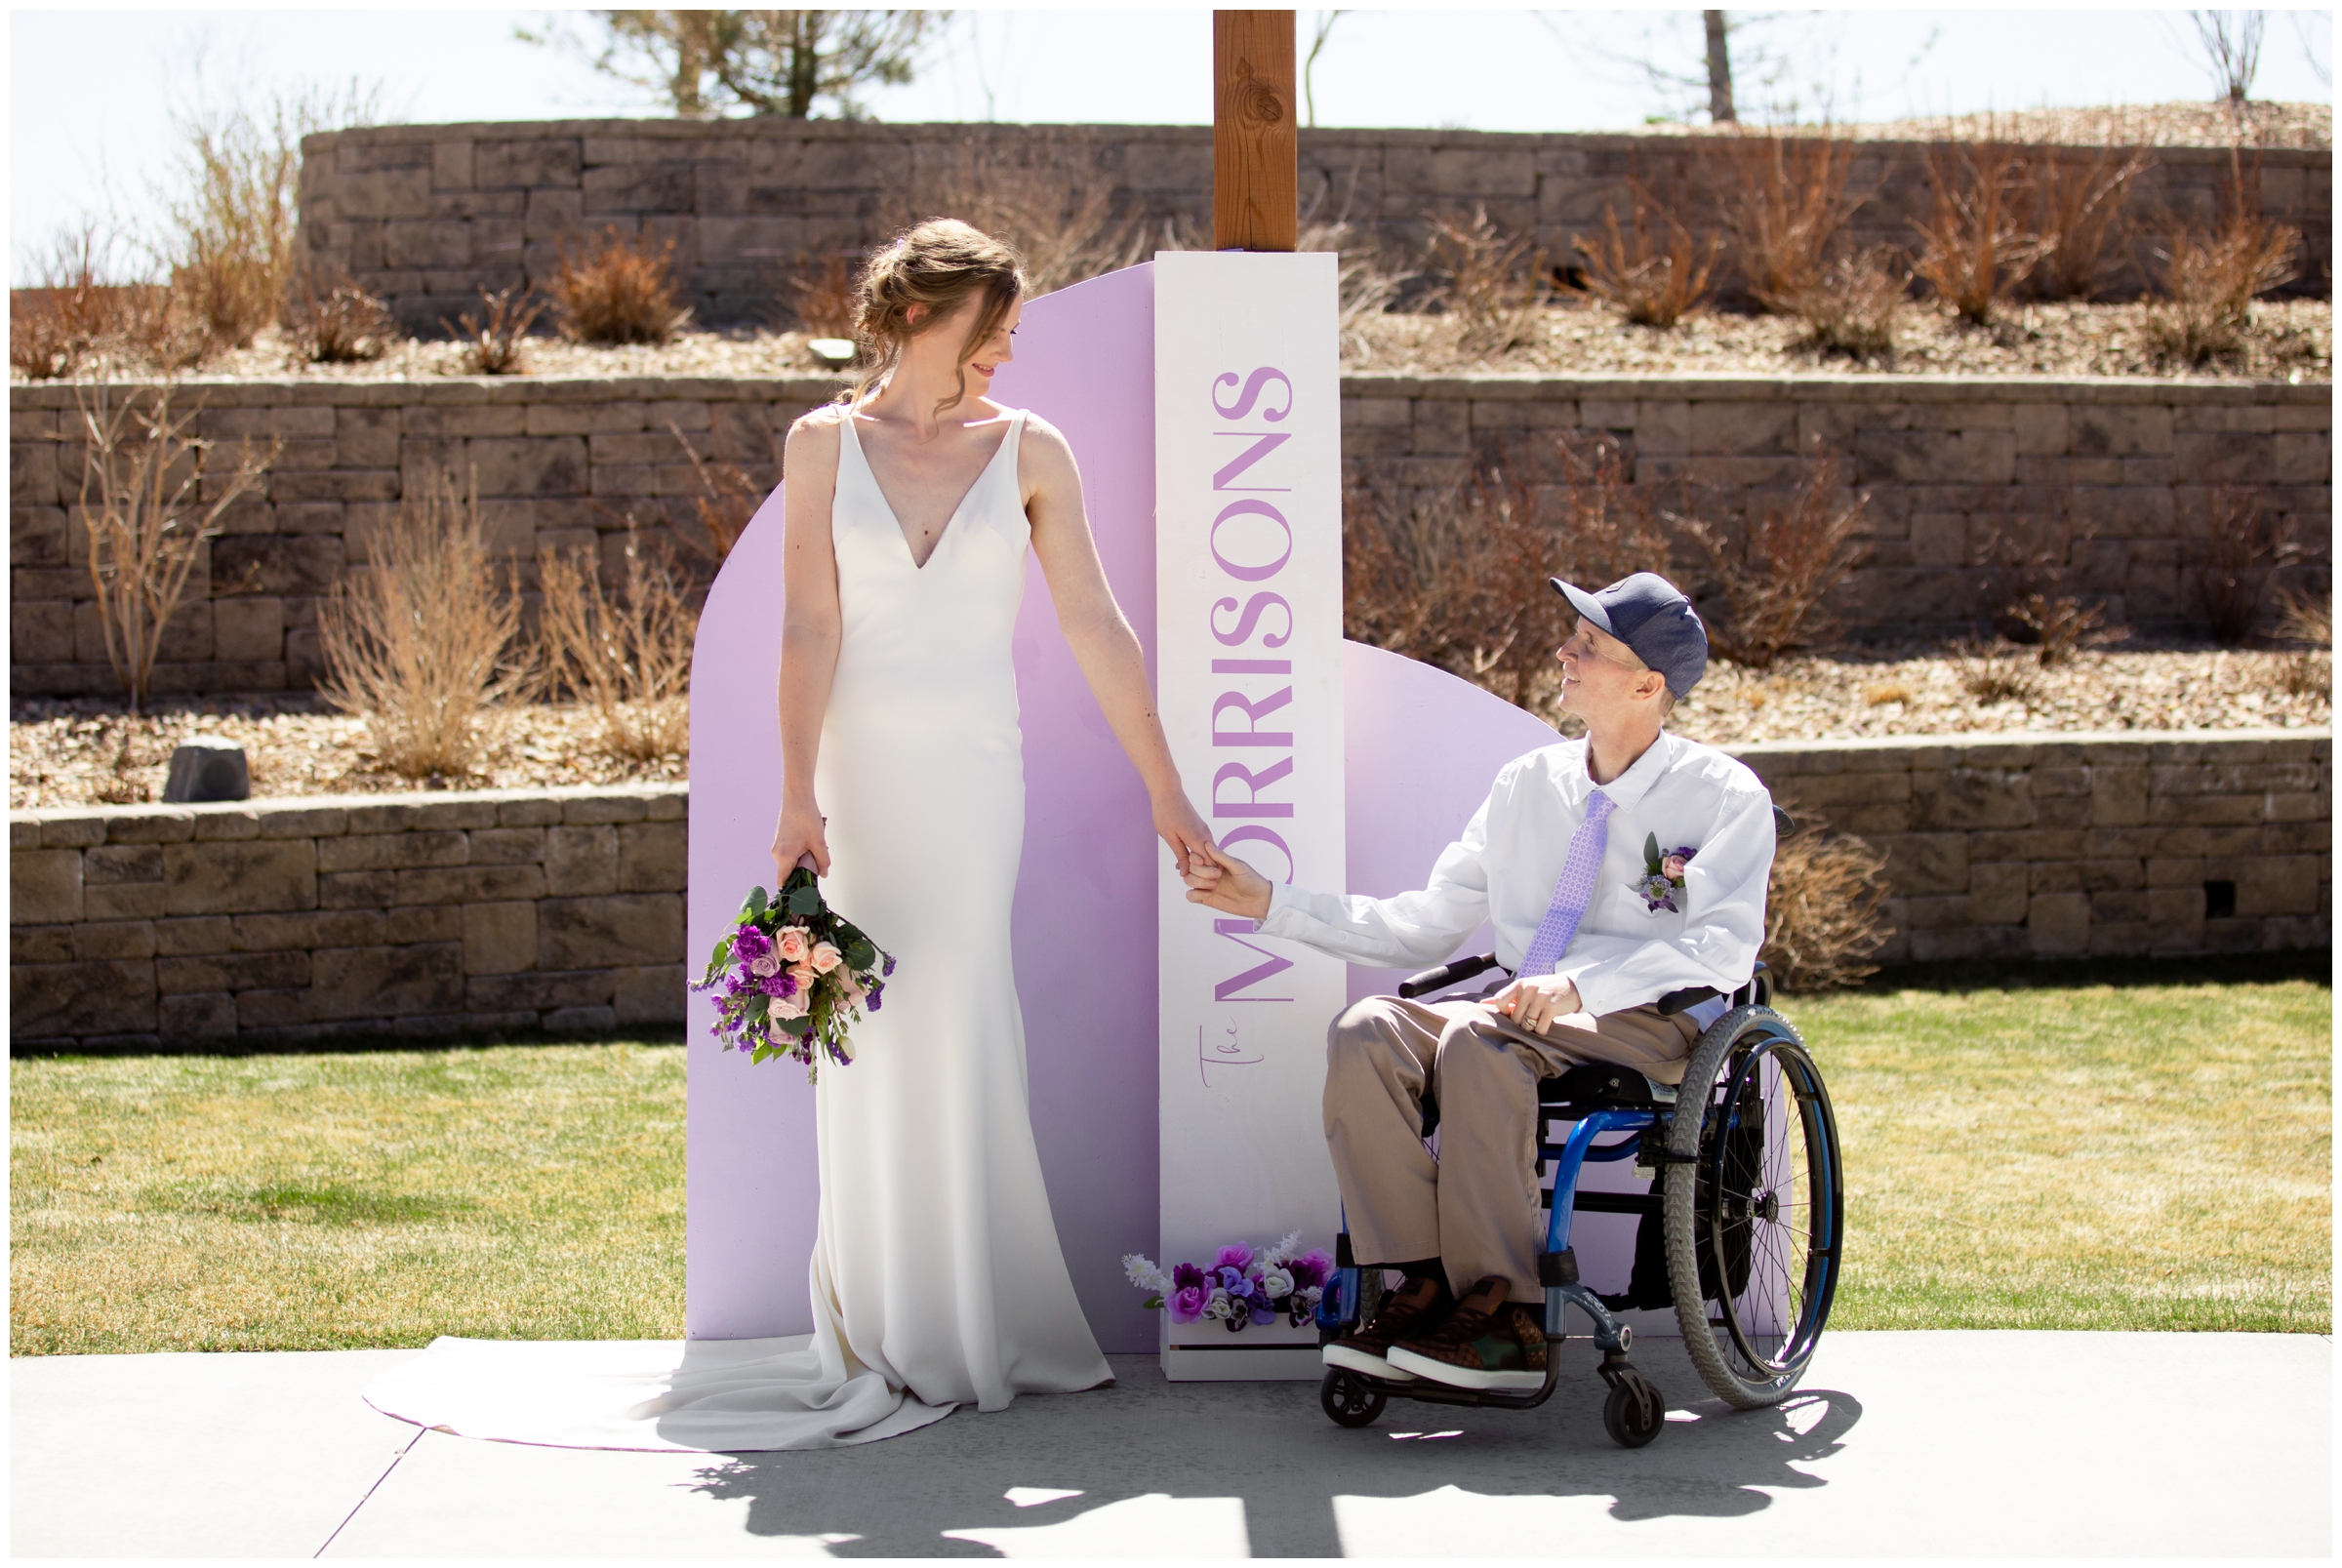 couple posing in front of custom sign with new last name at spring wedding in Elizabeth Colorado 